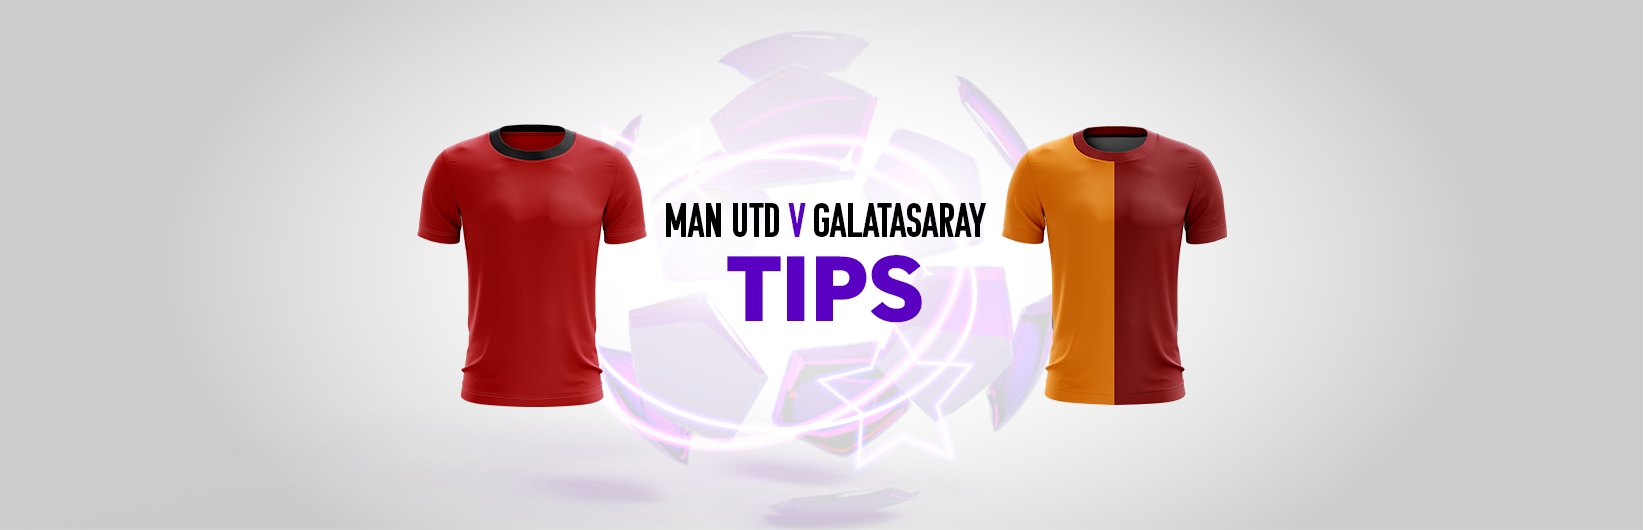 Champions League tips: Best bets for Man Utd v Galatasaray